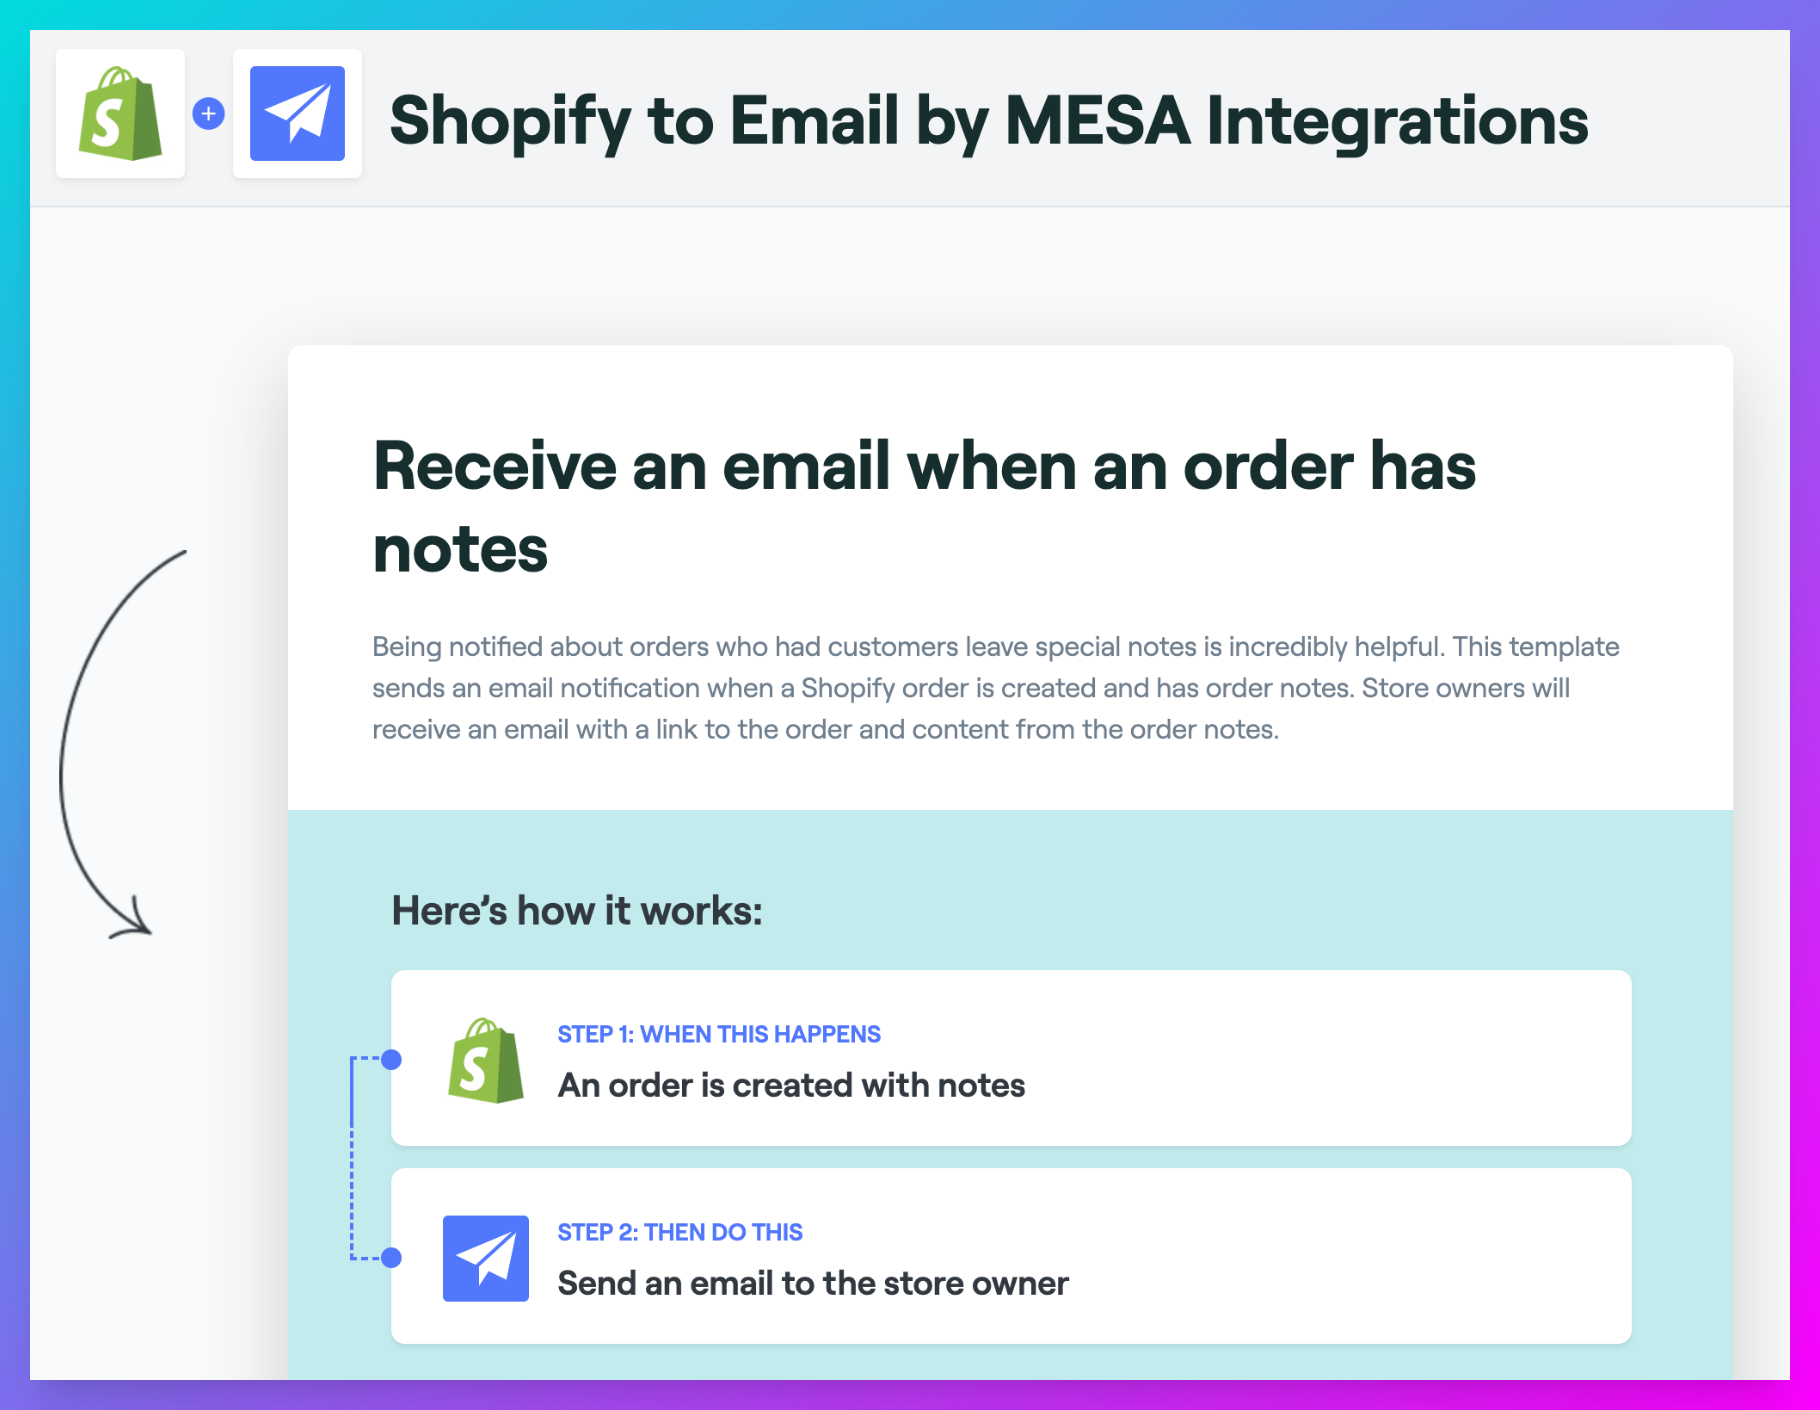 Receive an email when an order has Shopify notes